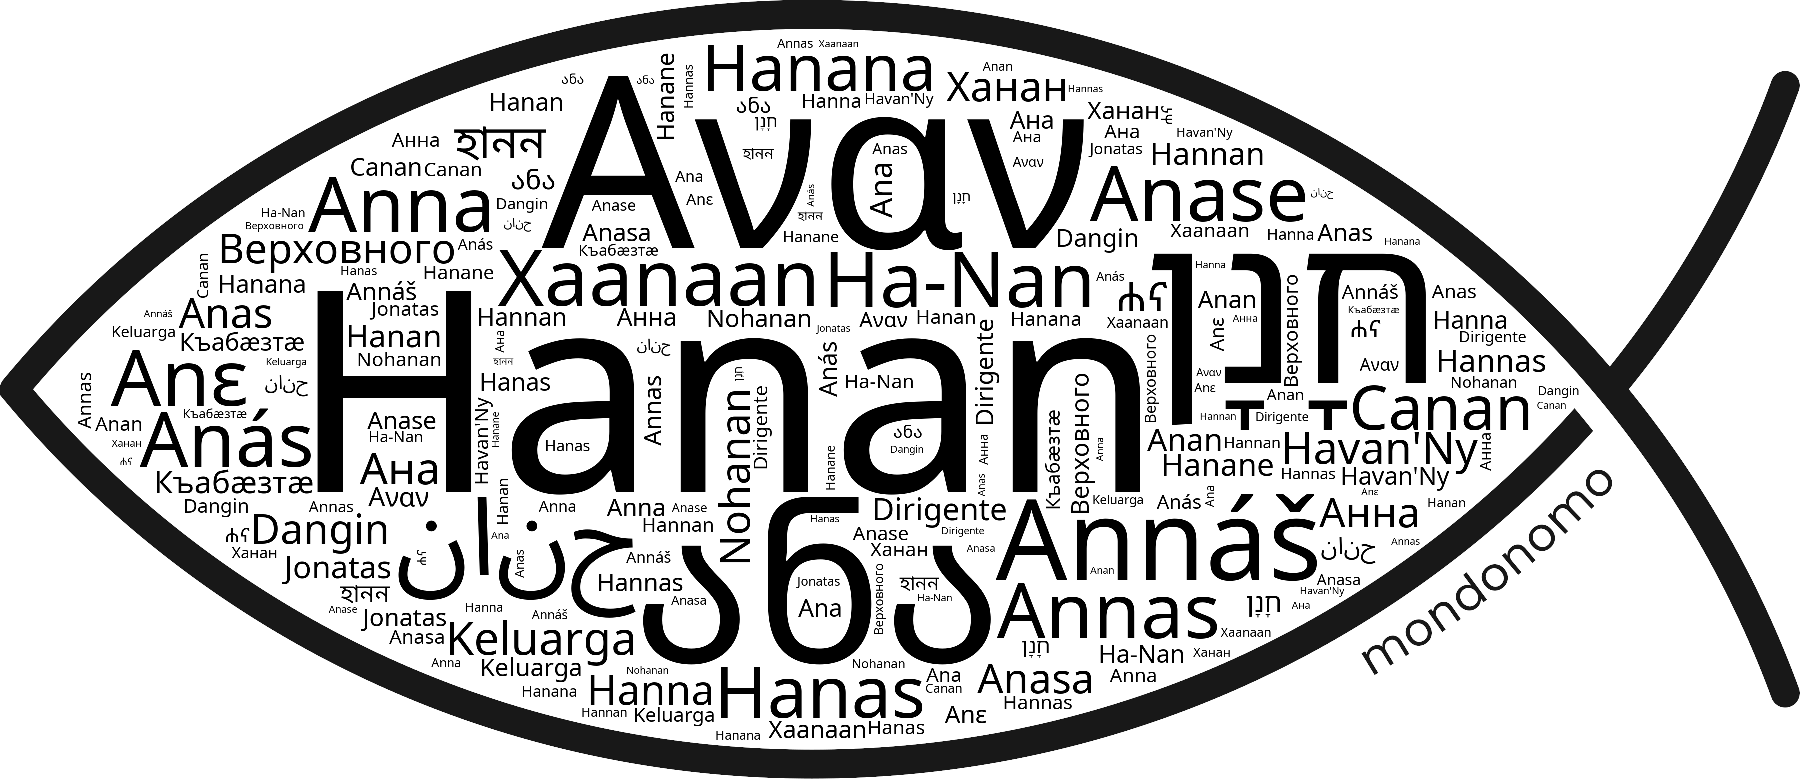 Name Hanan in the world's Bibles